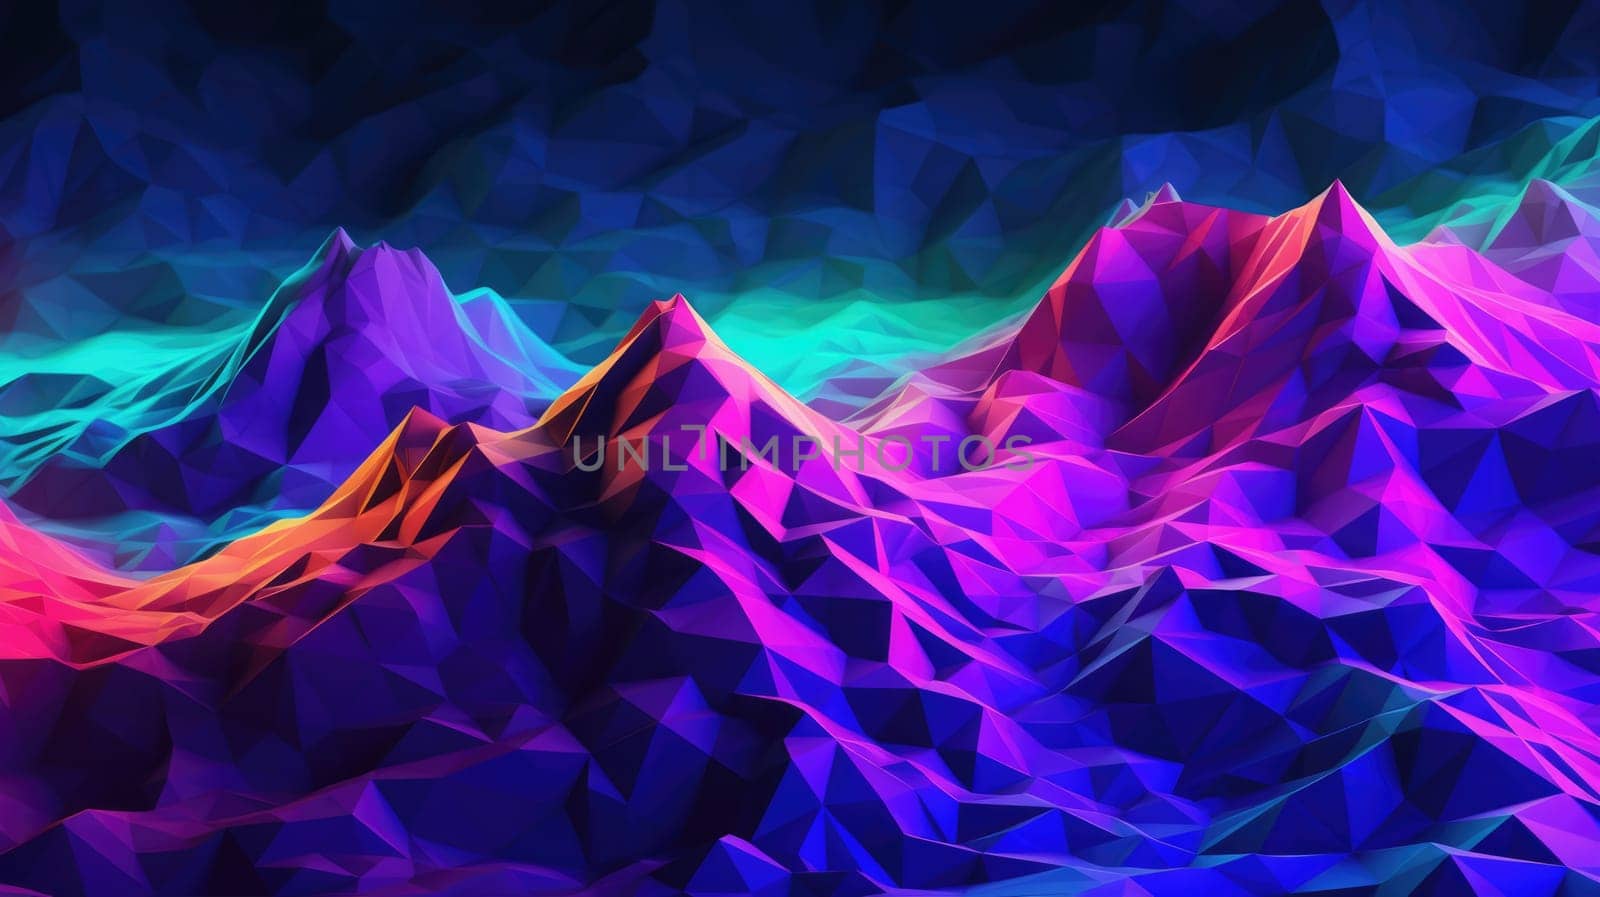 Cyberpunk mountain landscape abstract background for desktop. Picturesque by biancoblue